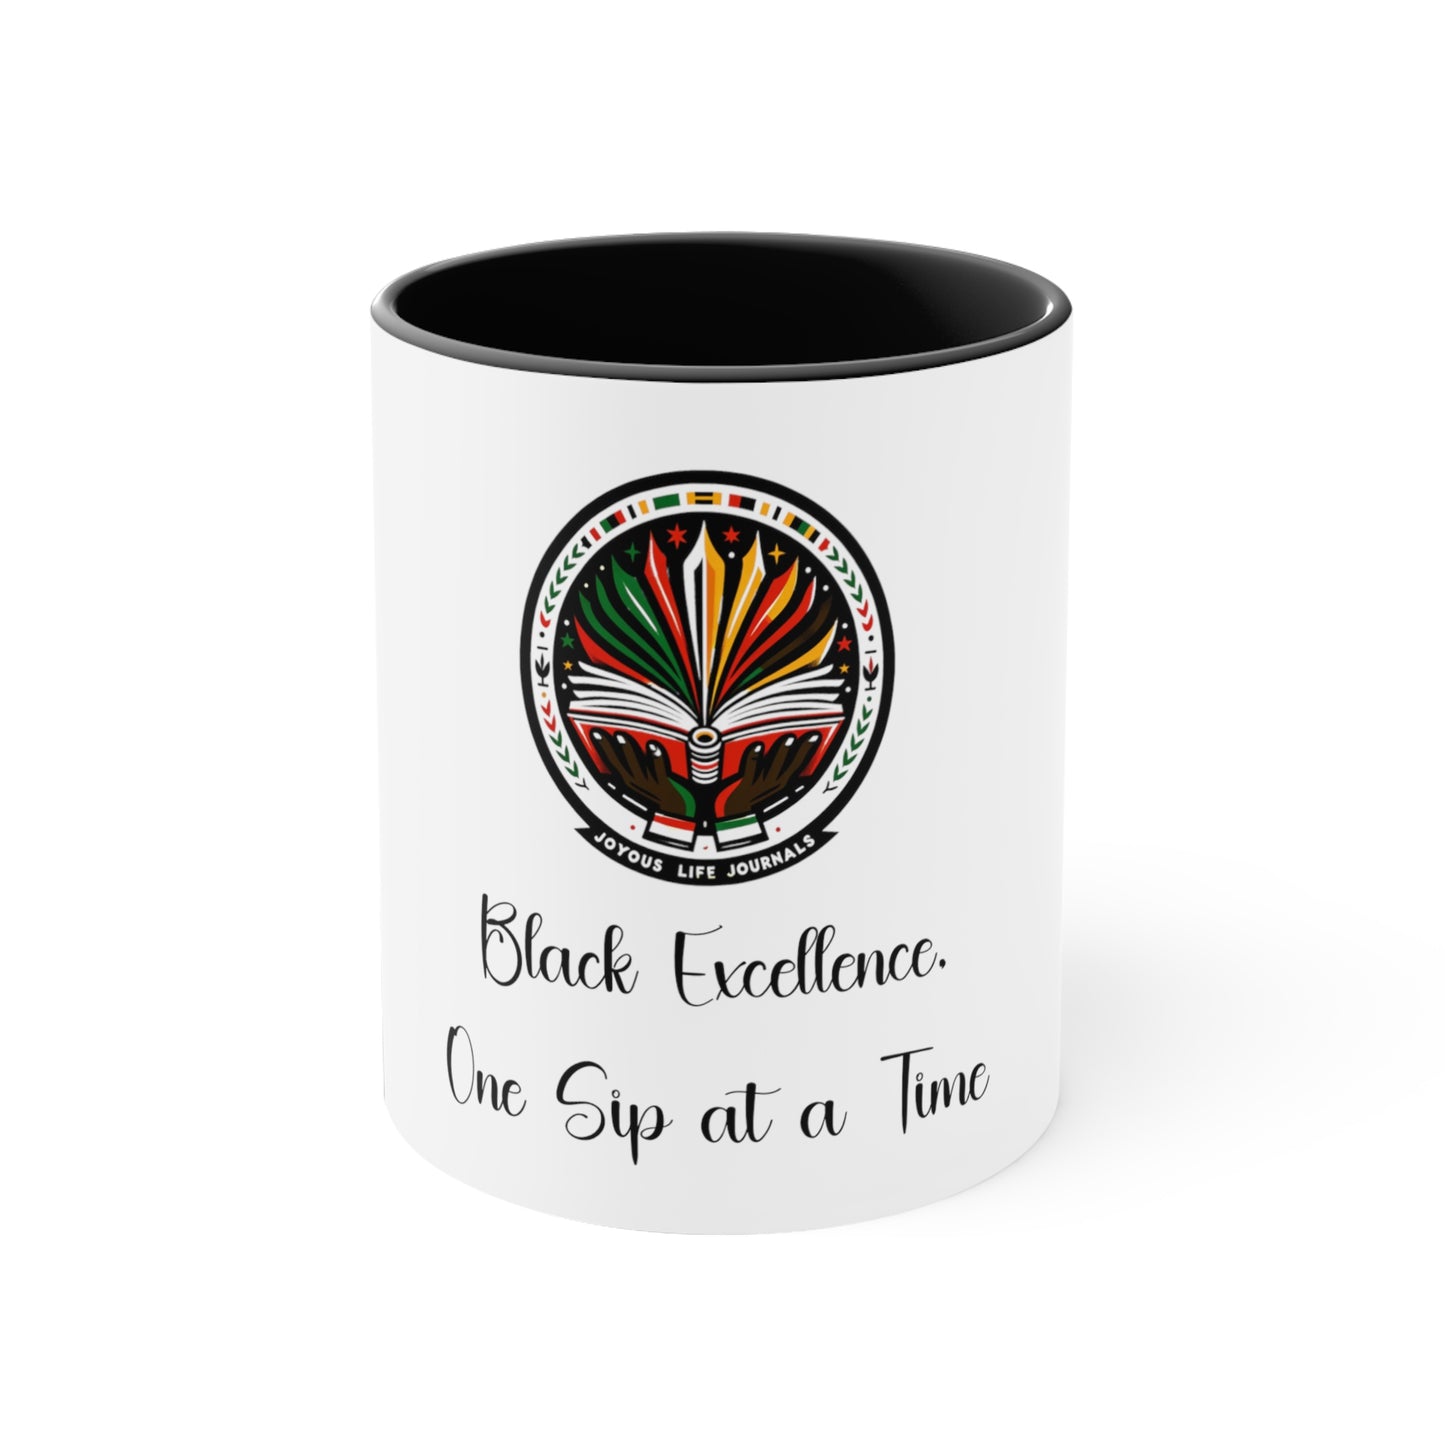 Black Excellence, One Sip at a Time, Two-Tone Accent Coffee Mug, 11oz, Joyous Life Journals